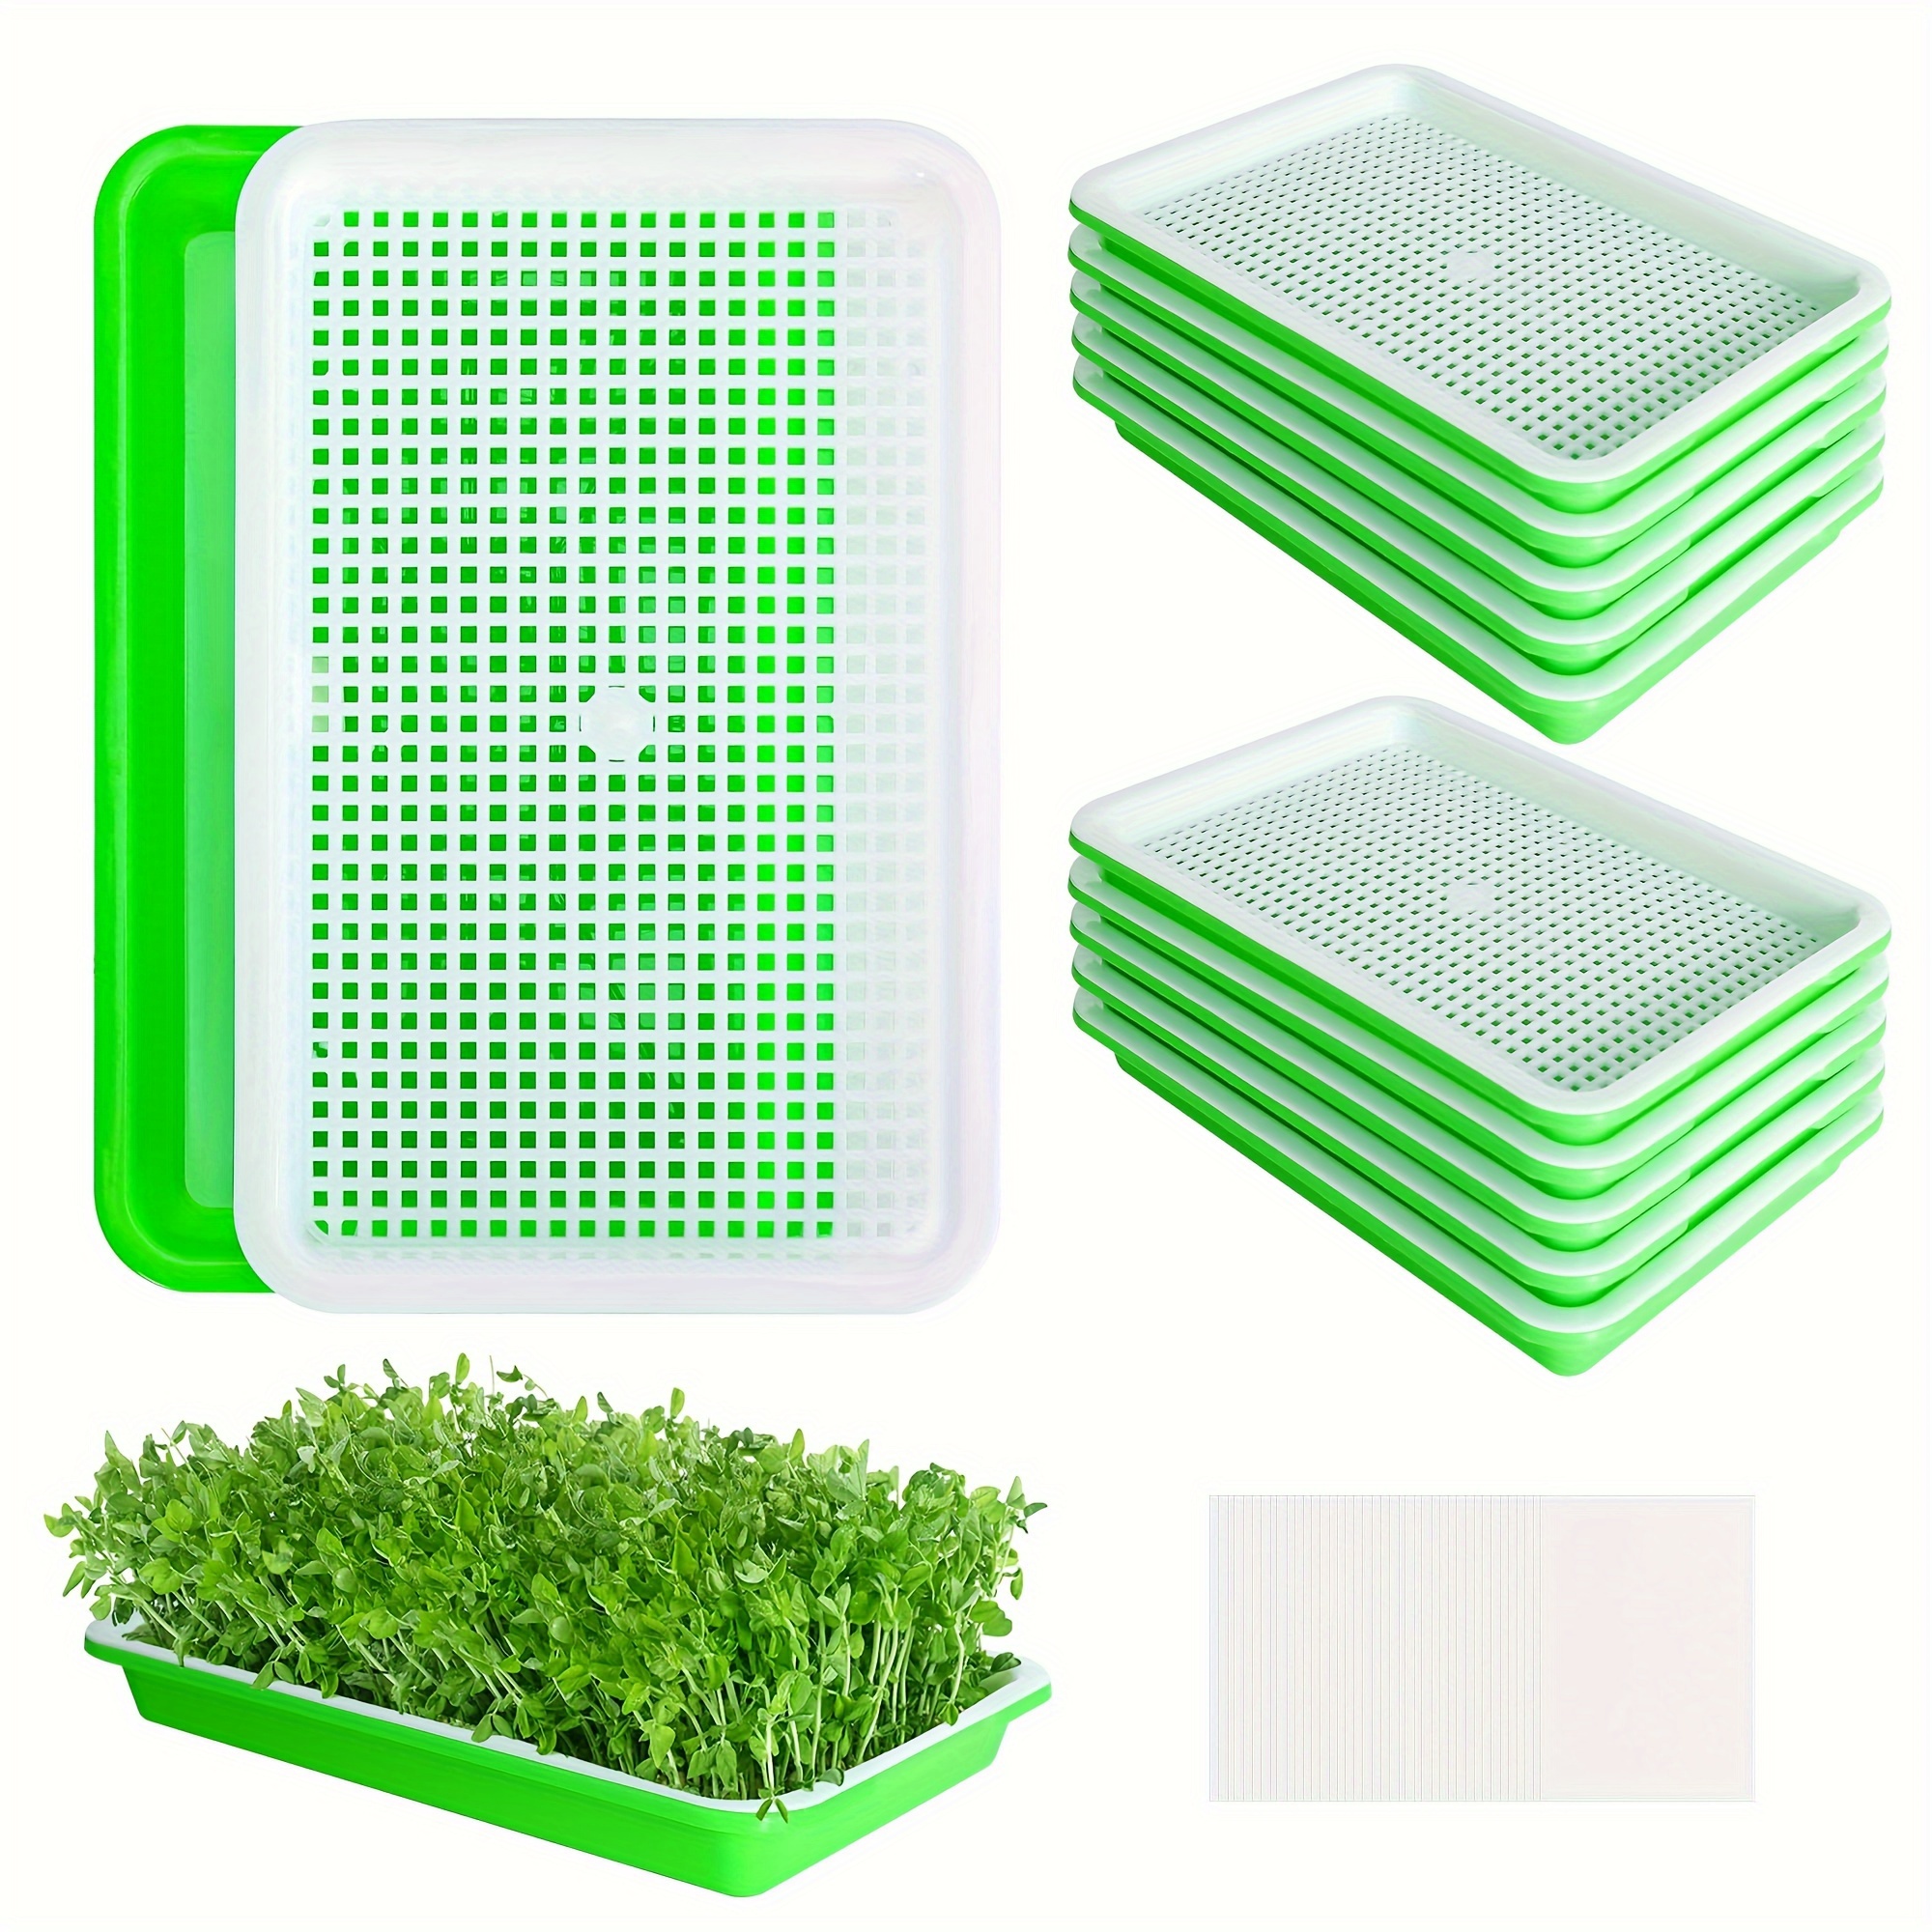 

10pcs Seed Sprouter Tray With Drain Holes - Bpa Free Seed Garden Plant Germination Propagation Trays, Soil-free Wheatgrass Tray Sprouter Growing Kit With Germinating Paper